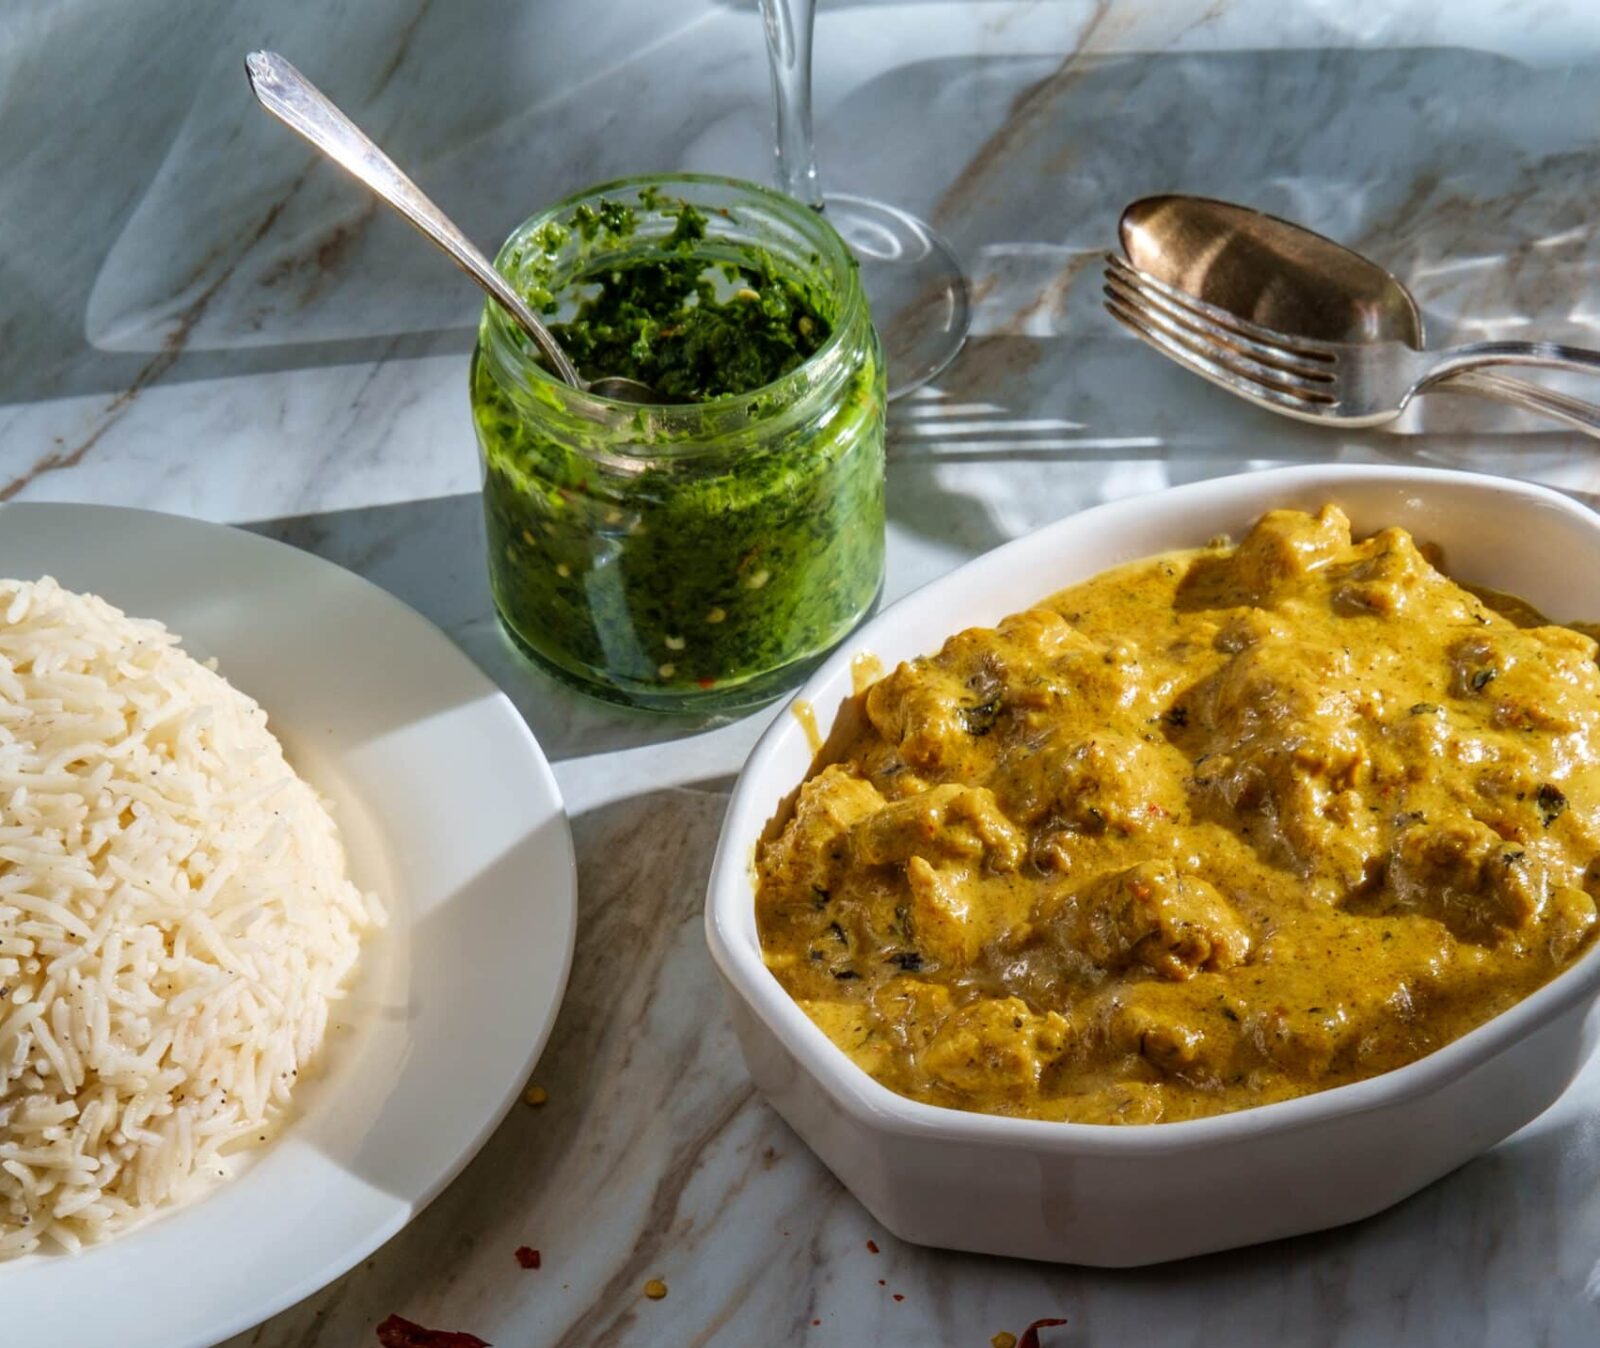 Authentic Indian almond chicken korma curry dinner with basmati rice and green chutney